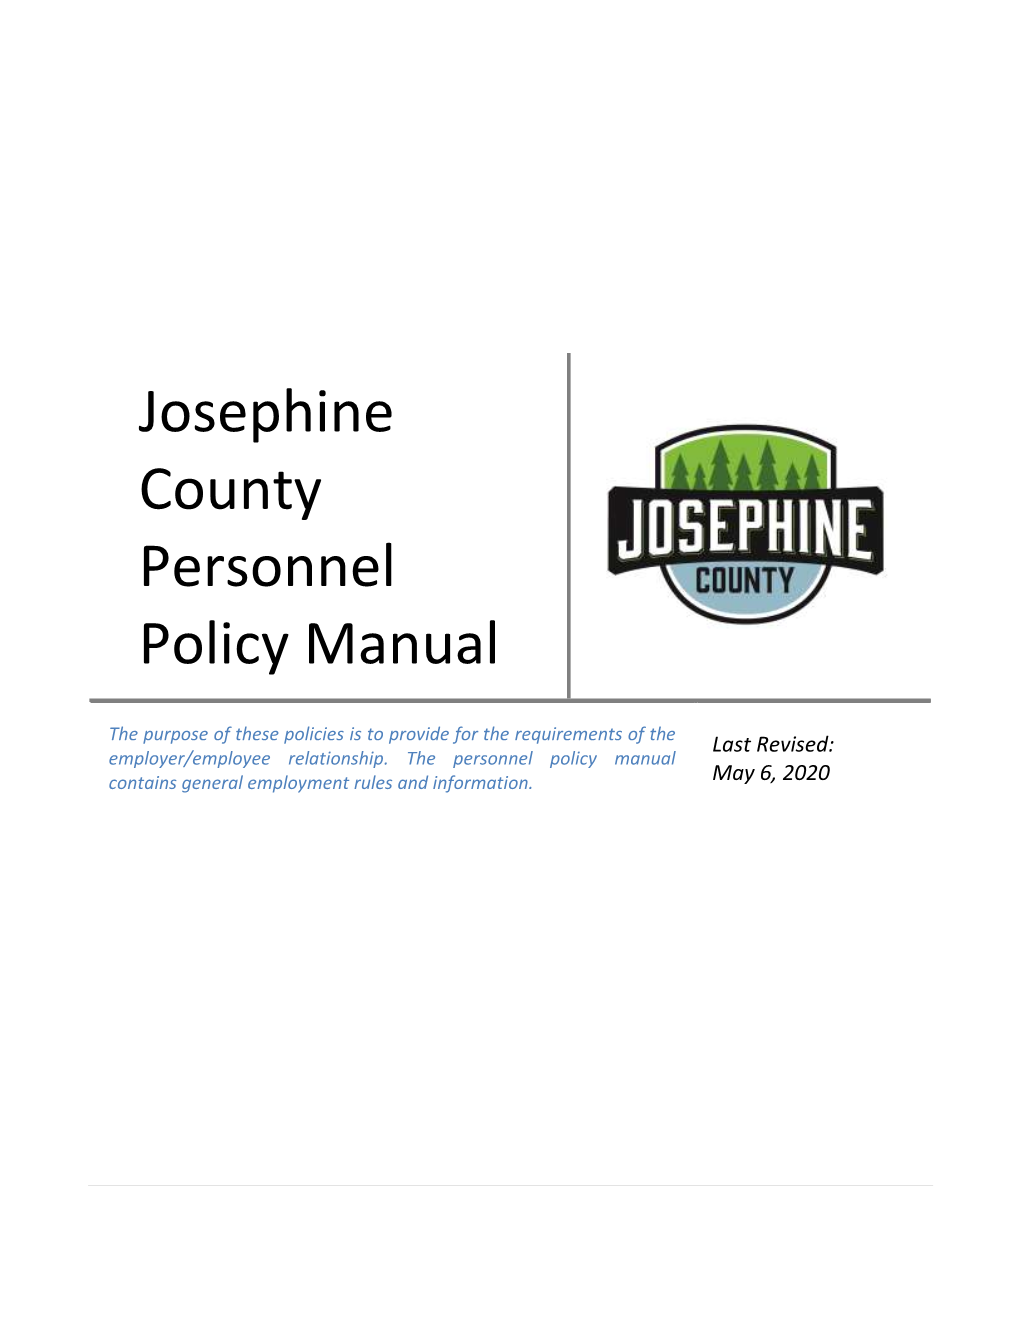 Josephine County Personnel Policy Manual